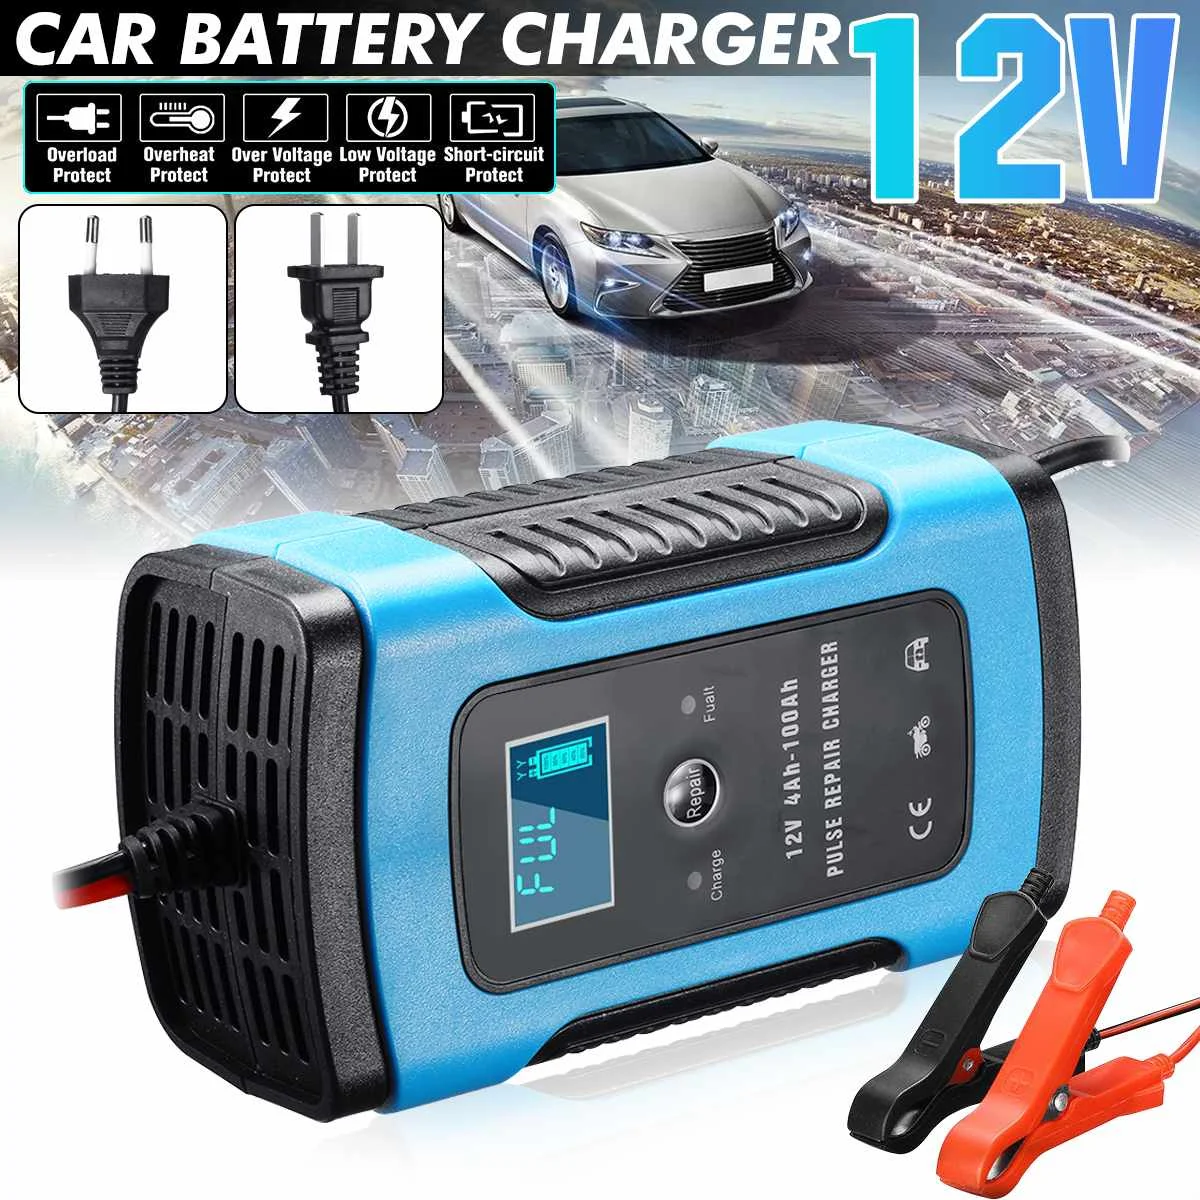 Car Battery Charger 12V 6A Fully Automatic Intelligent Power Pulse Repair Battery Charger LCD Display Lead Acid Battery Charger